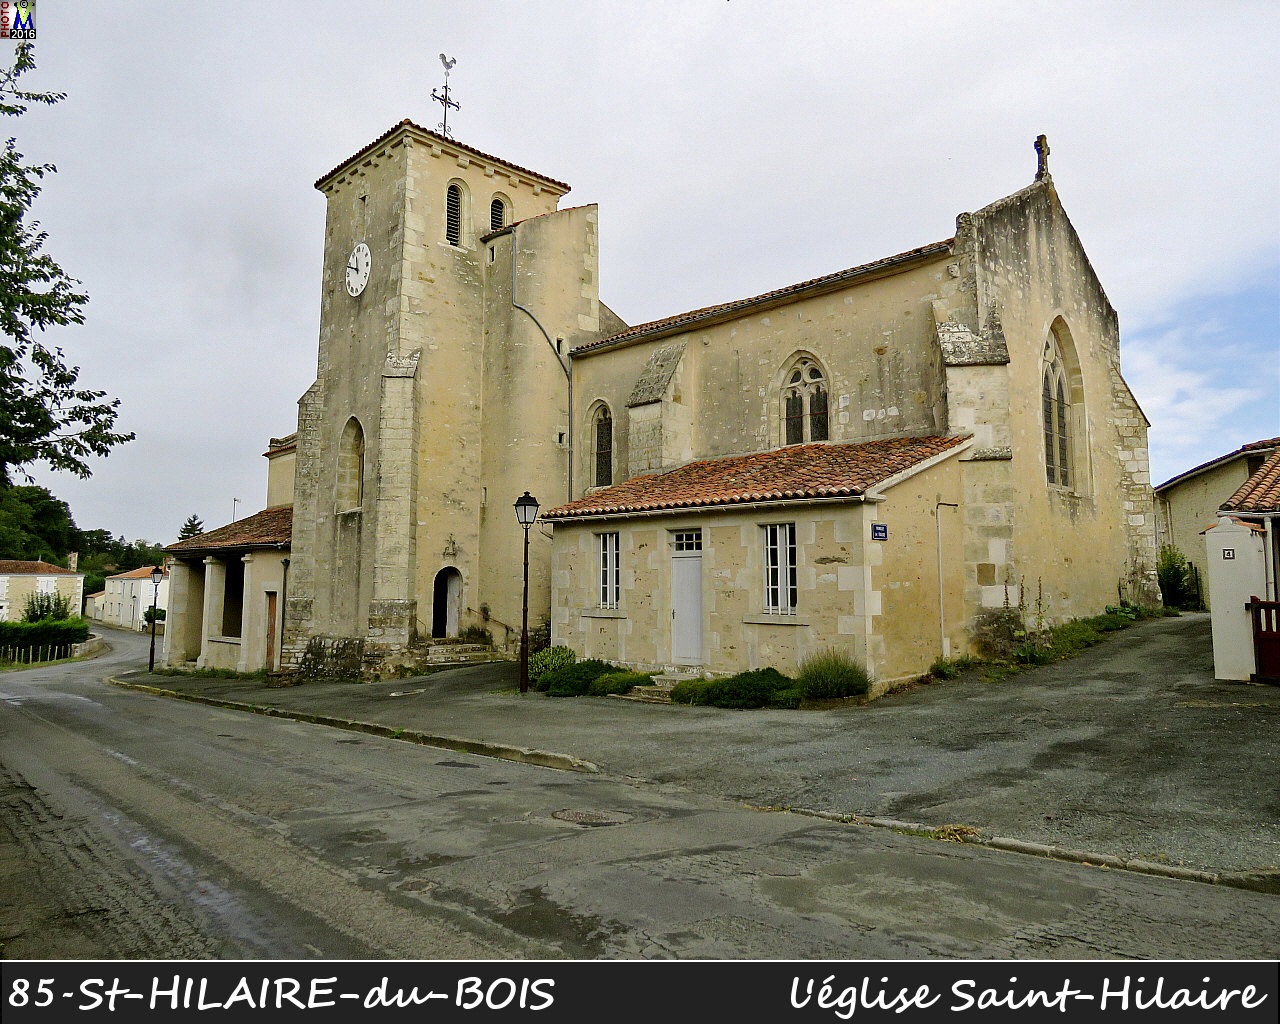 85CAILLERE-StHILAIRE-HILAIRE_eglise_1002.jpg